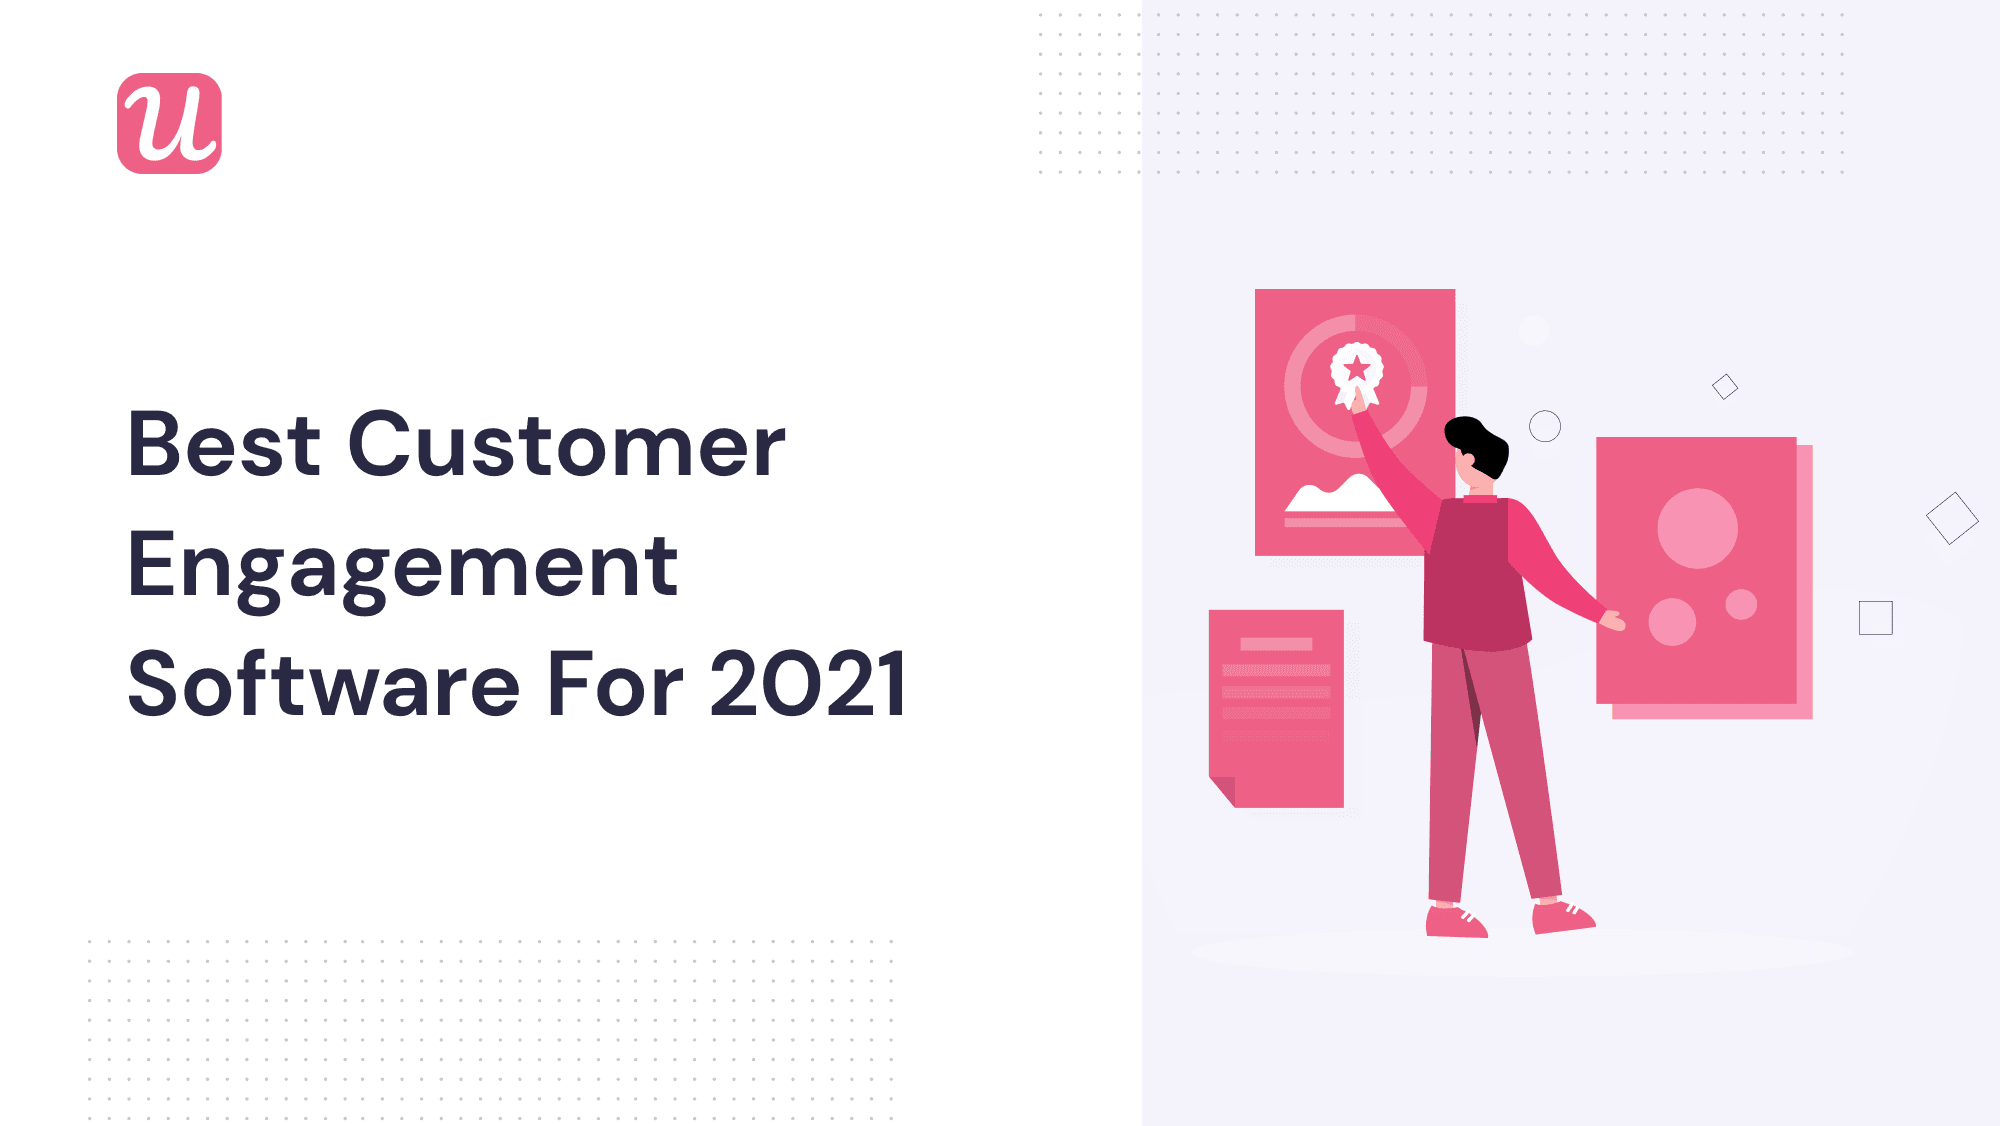 The 9 Best Customer Engagement Software for 2021